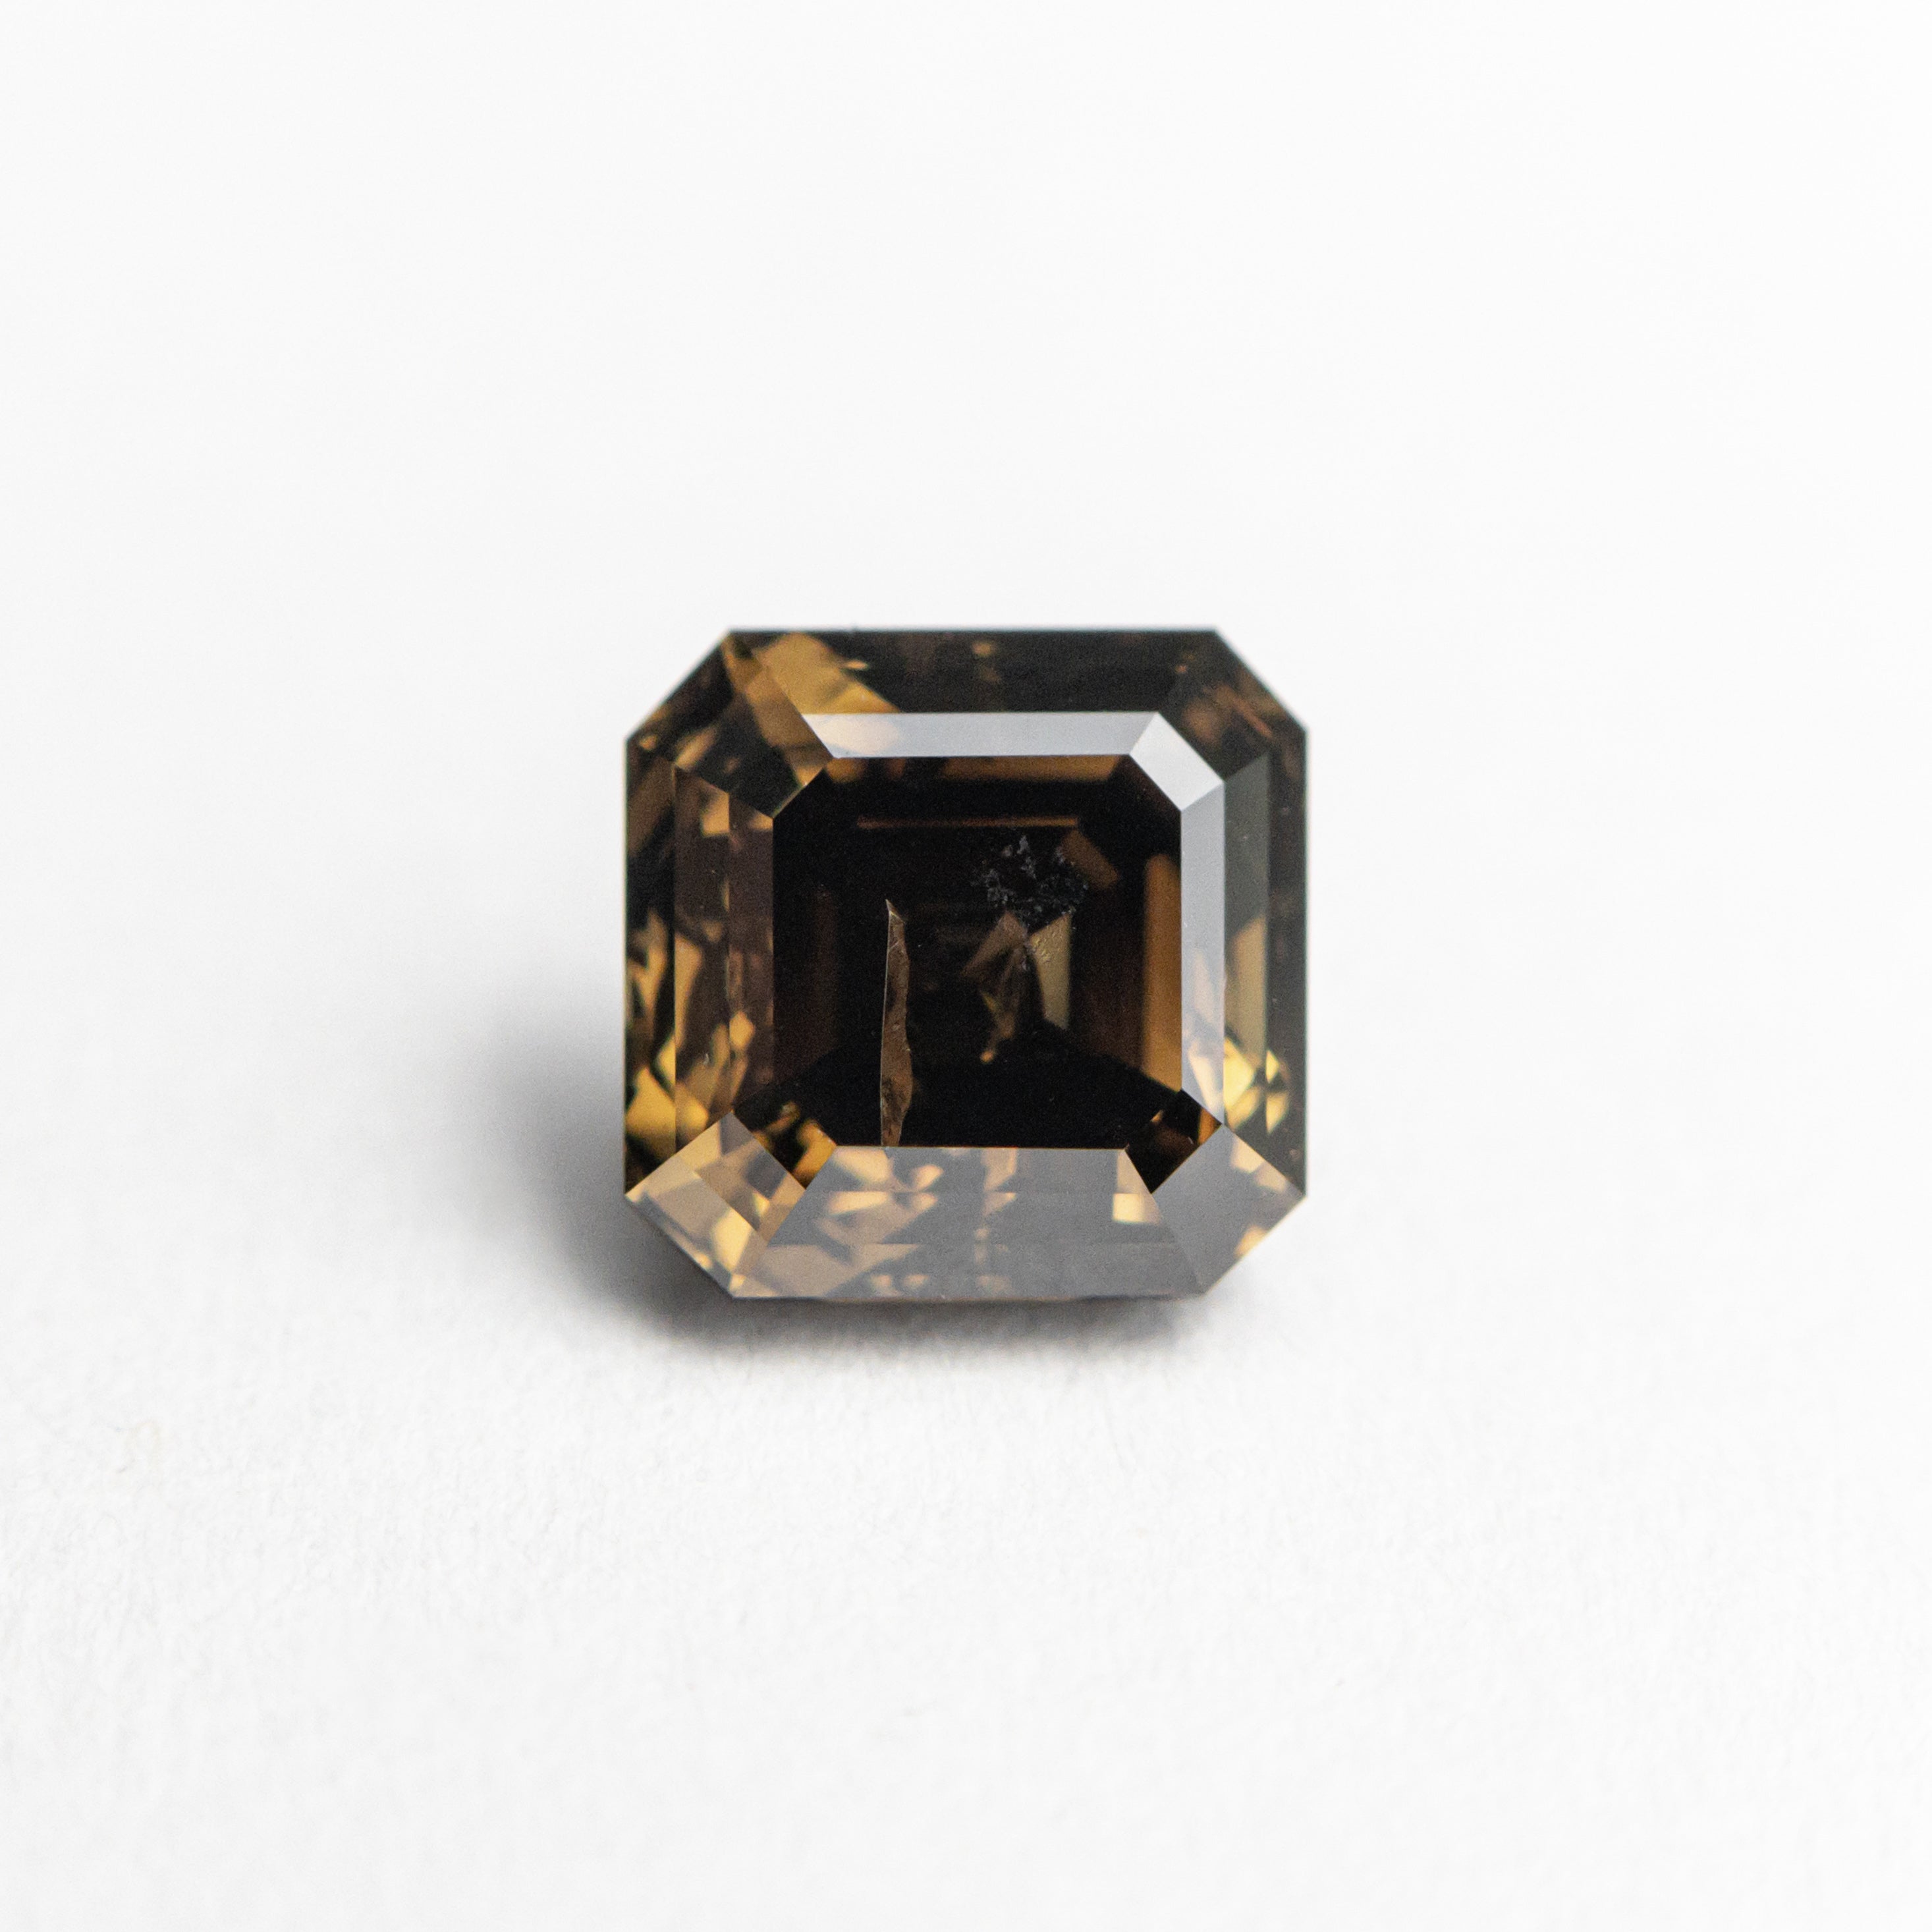 The 1.06ct 5.46x5.27x4.00mm Cut Corner Square Step Cut 🇨🇦 21769-01 by East London jeweller Rachel Boston | Discover our collections of unique and timeless engagement rings, wedding rings, and modern fine jewellery.